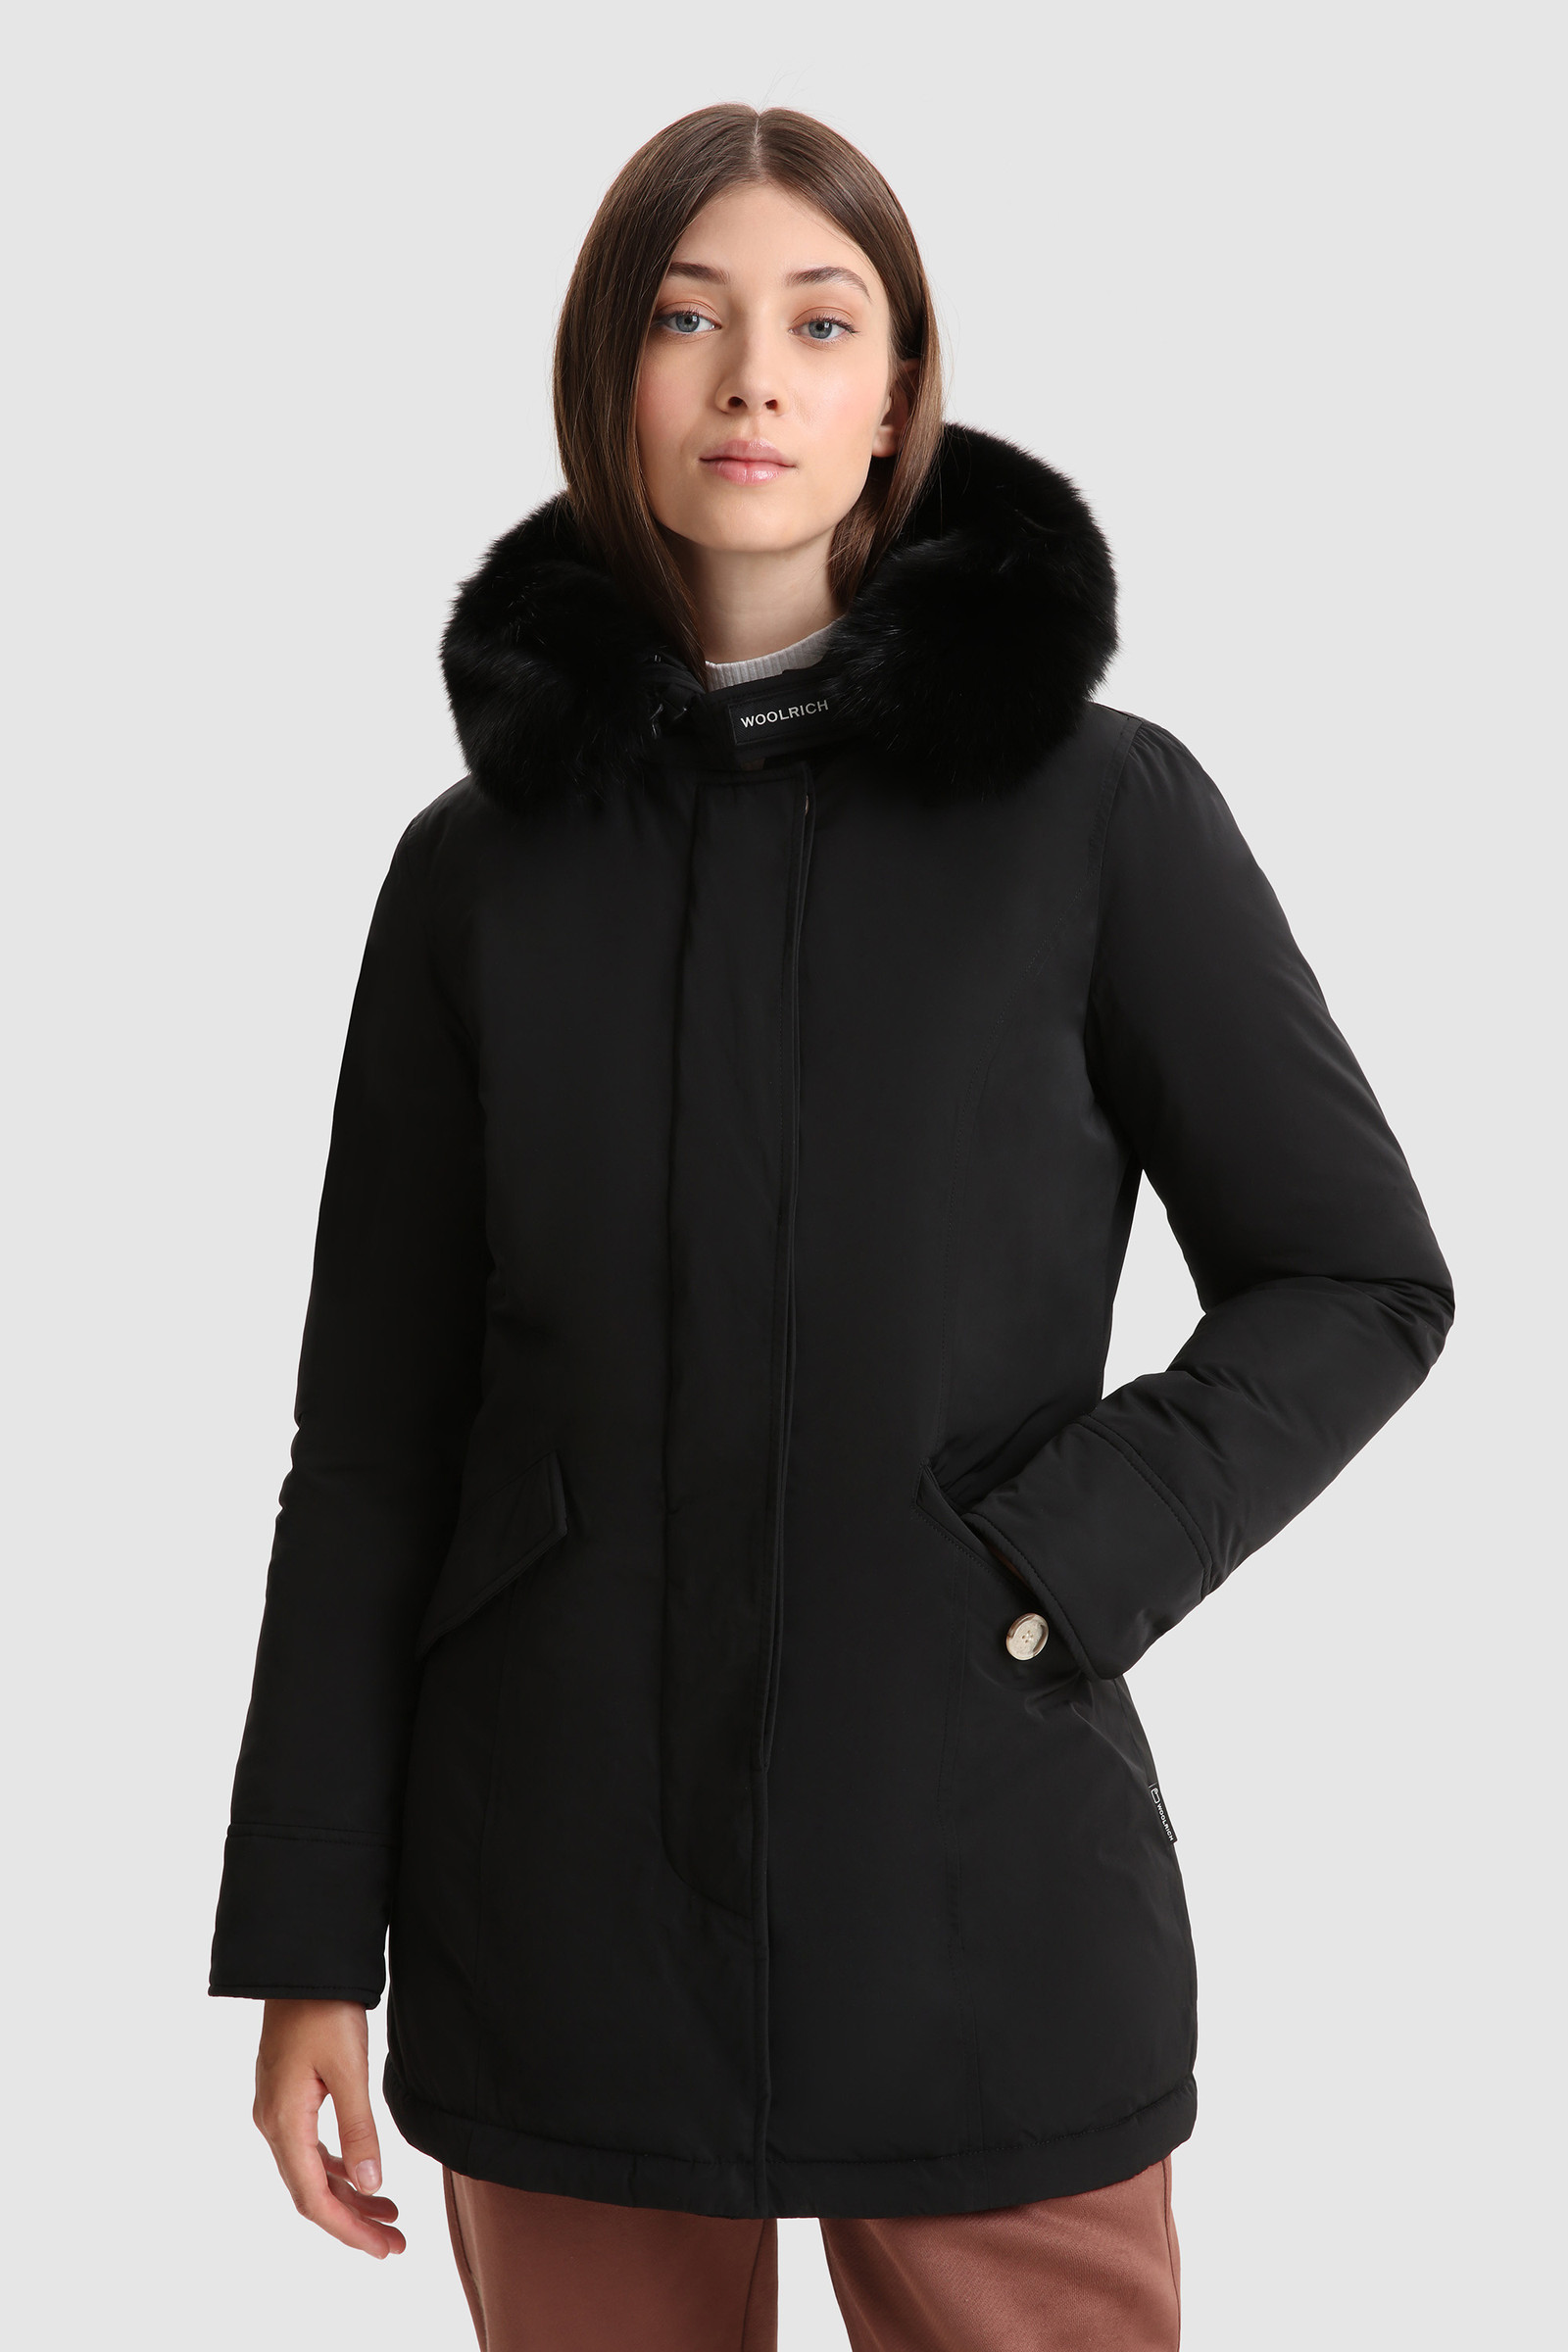 zonlicht Banyan hout Women's Arctic Parka in City Fabric with Removable Dyed Fur Trim Black |  Woolrich USA